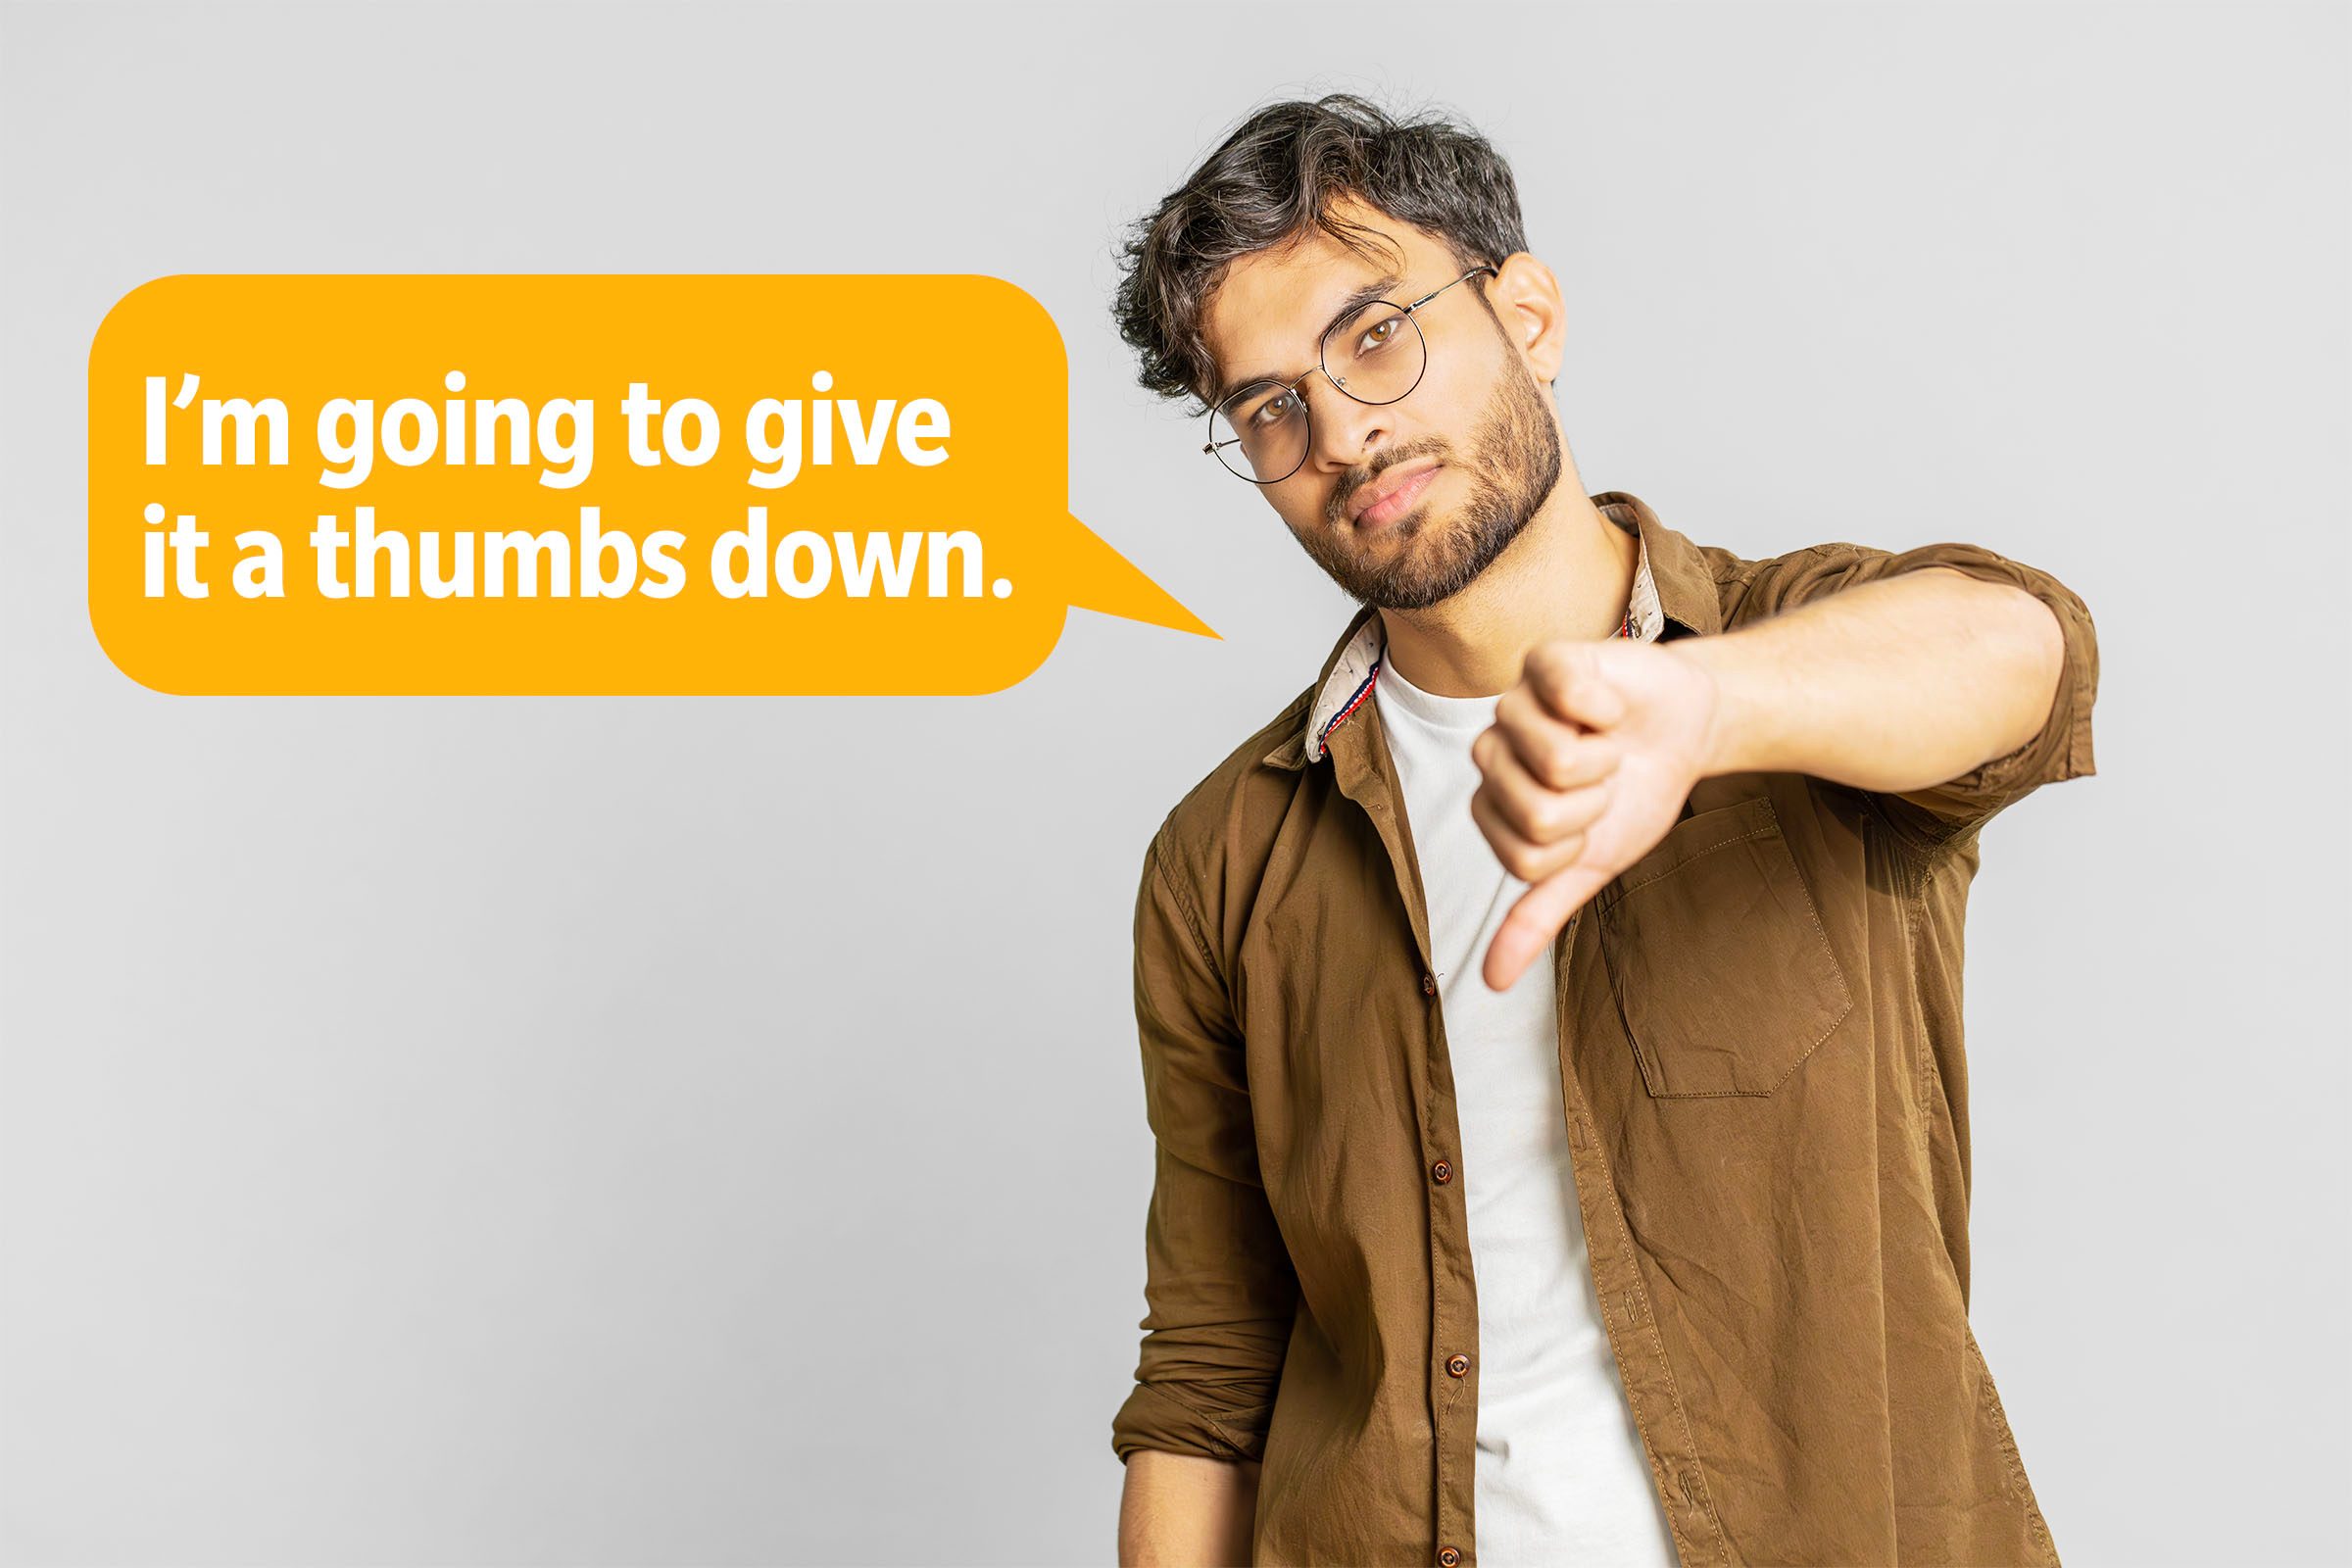 Man giving a thumbs down delivering a comeback roast, speech bubble text: "I'm going to give it a thumbs down."